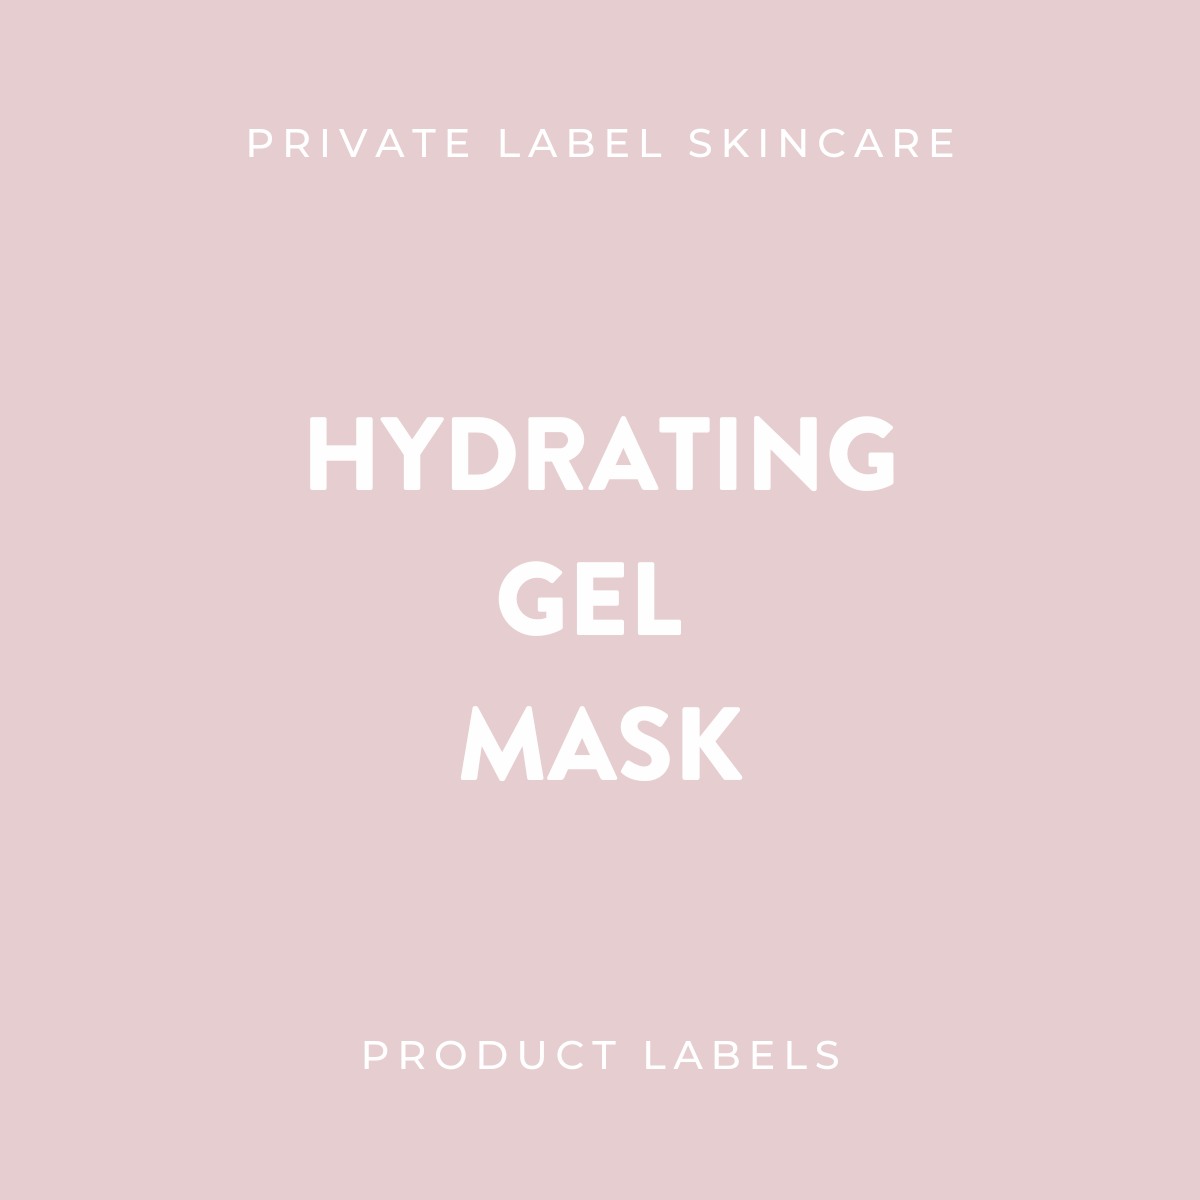 Hydrating Gel Mask Product Labels (x 20 labels)